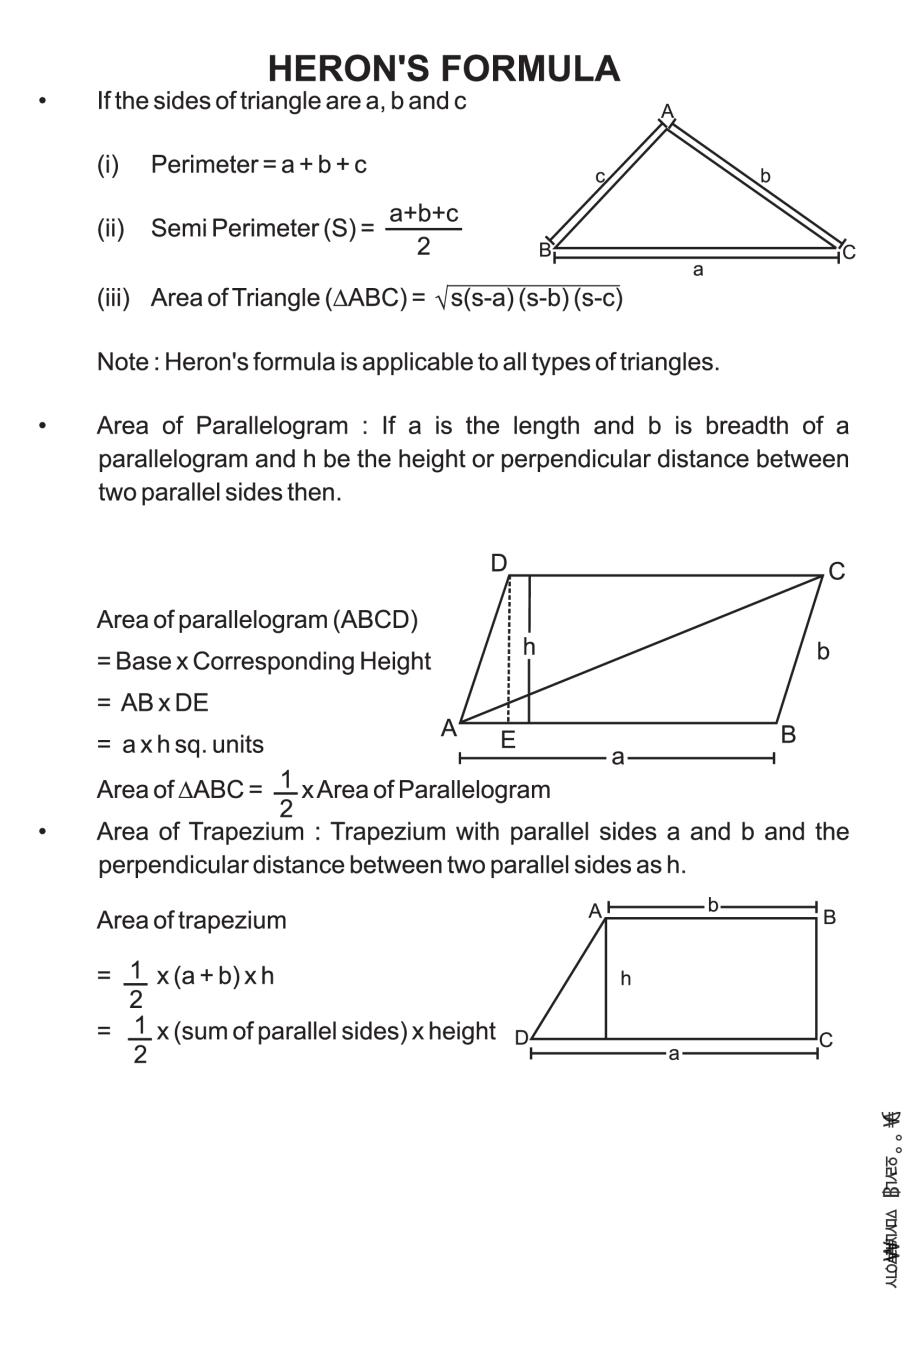 case study questions of heron's formula class 9